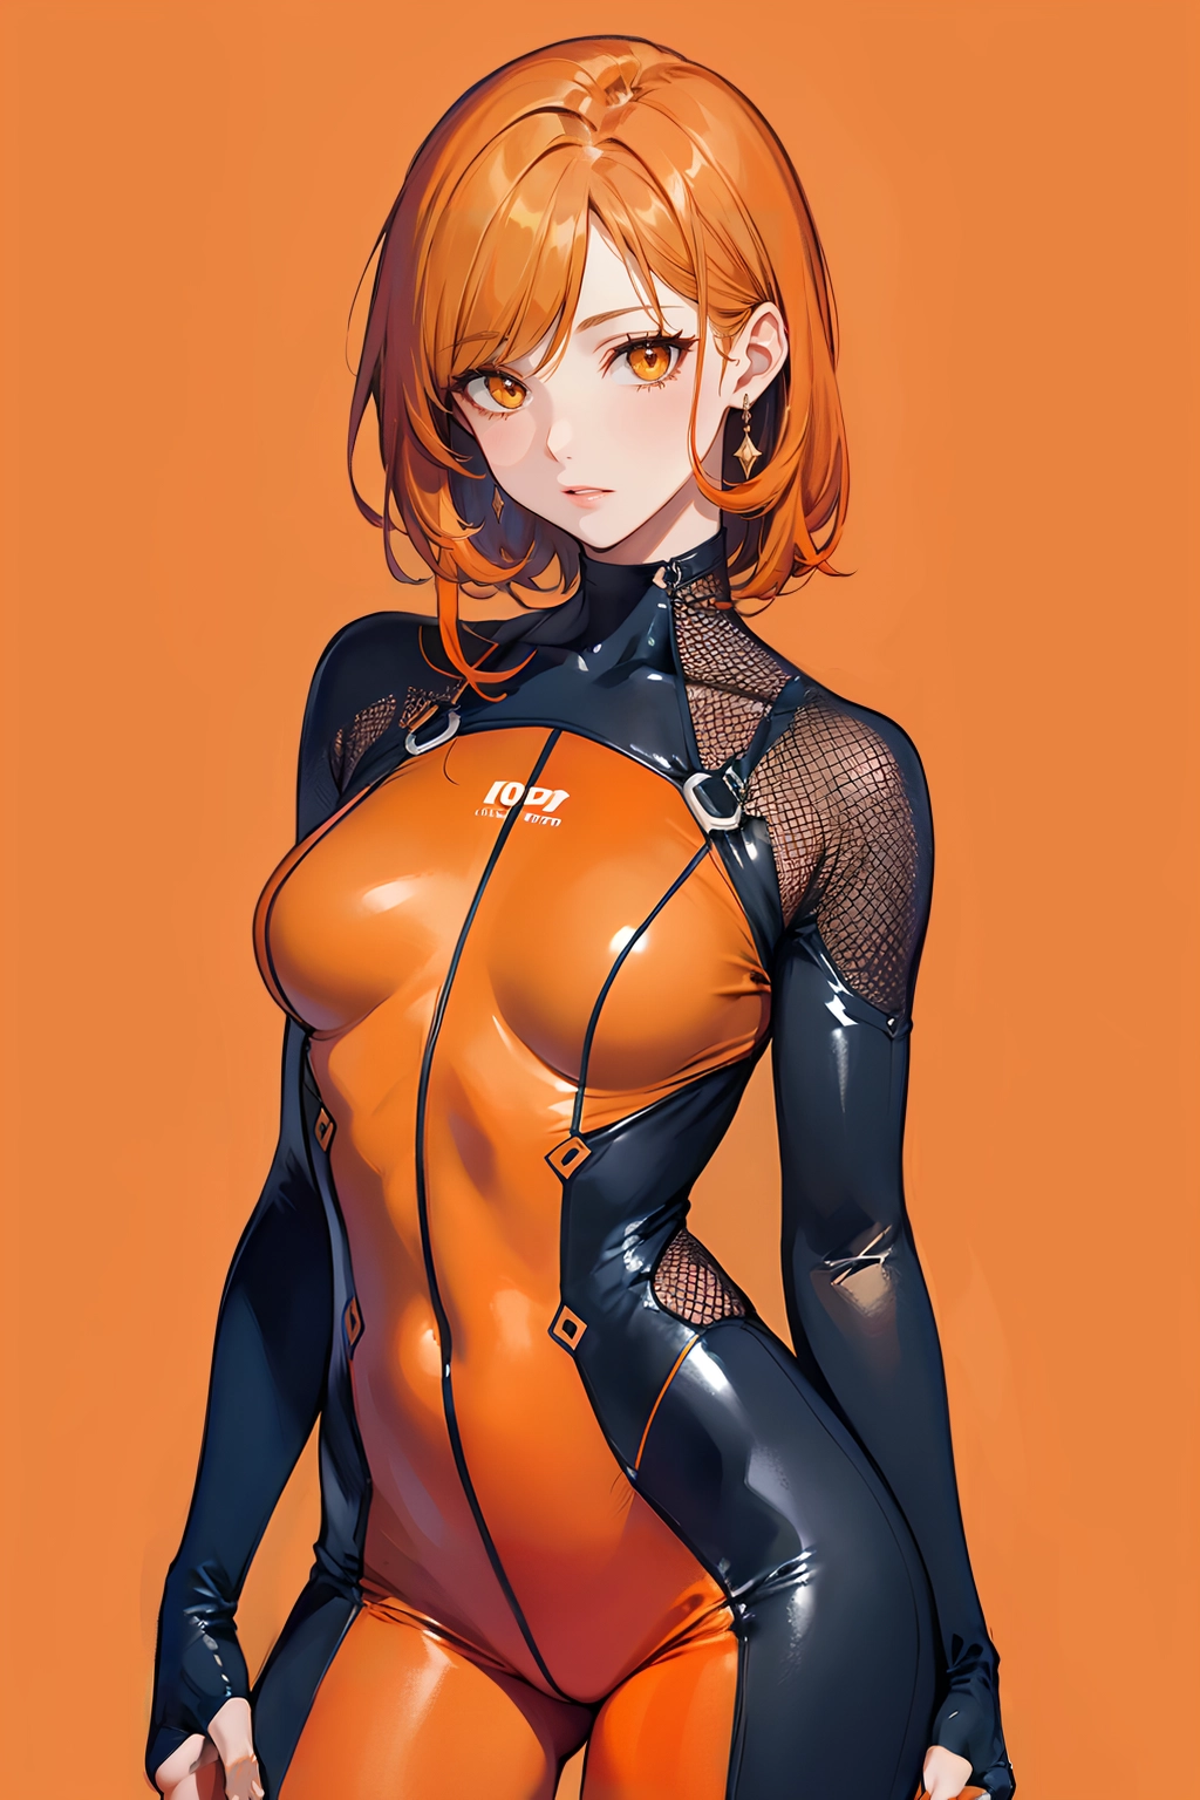 A woman wearing a black and orange bodysuit poses for the camera.